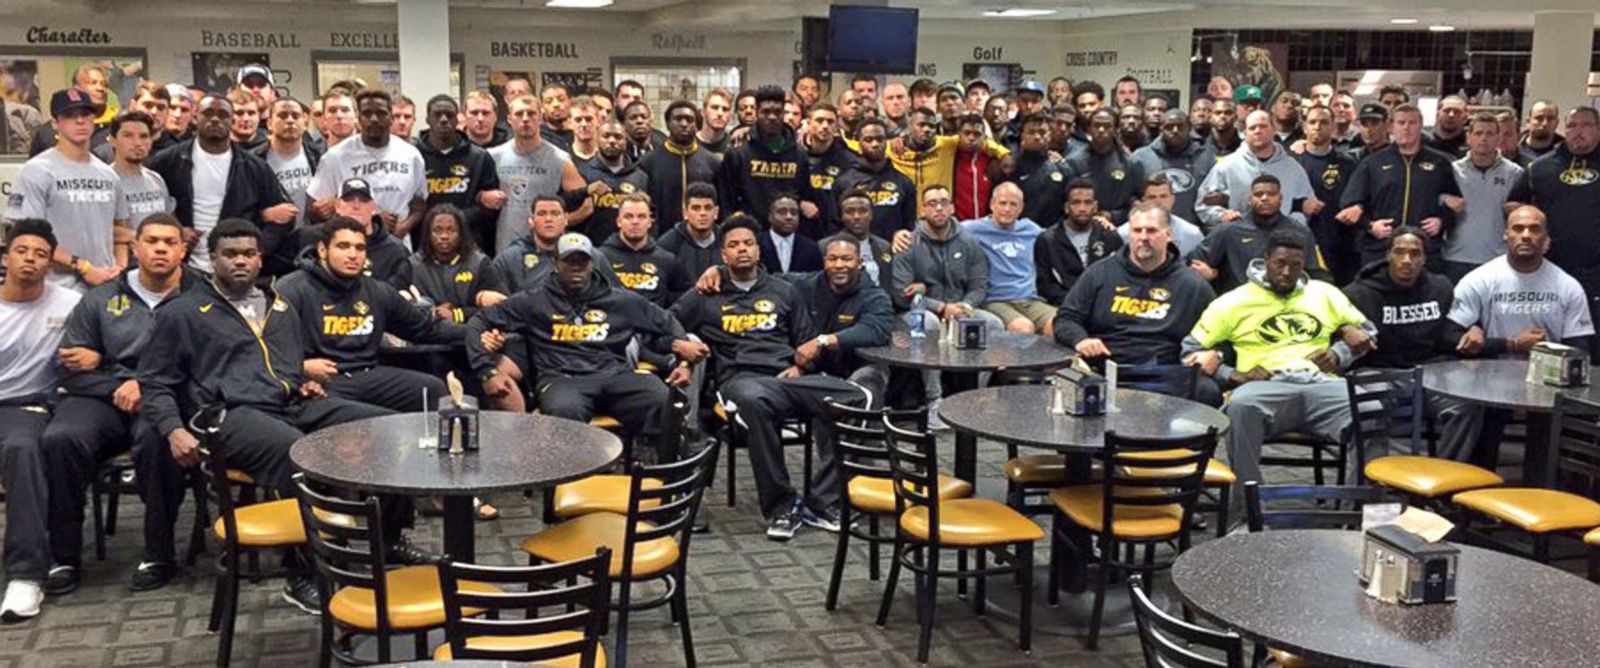 PHOTO: The University of Missouris head coachs twitter, @GaryPinkel, tweeted this photo with the caption, 